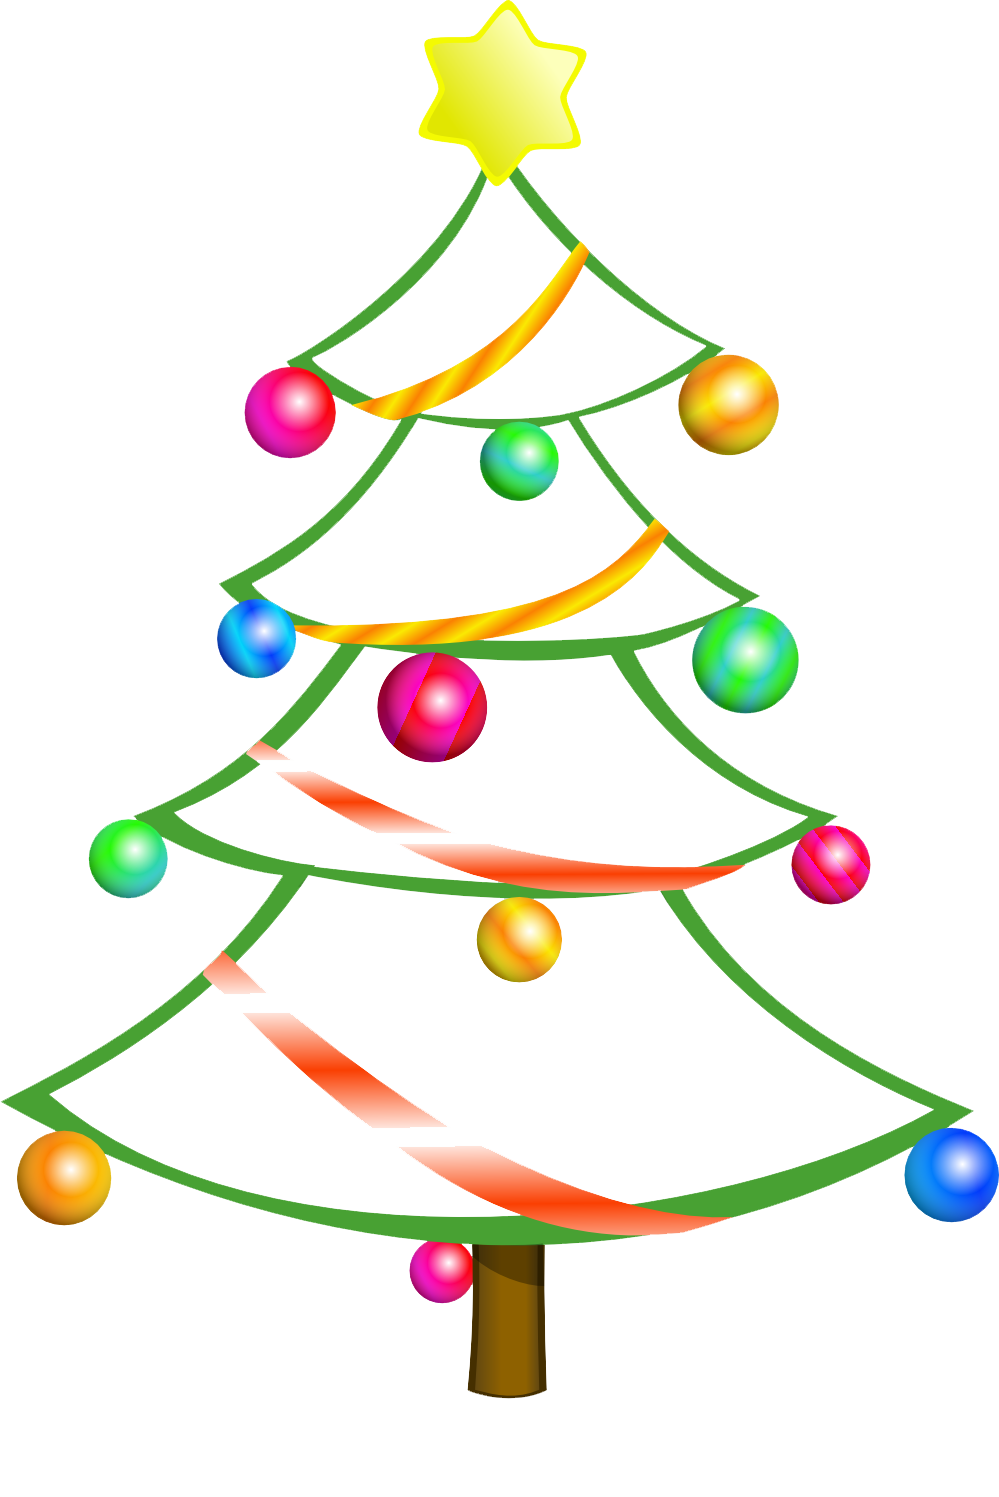 Free To Use   Public Domain Christmas Tree Clip Art   Page 3